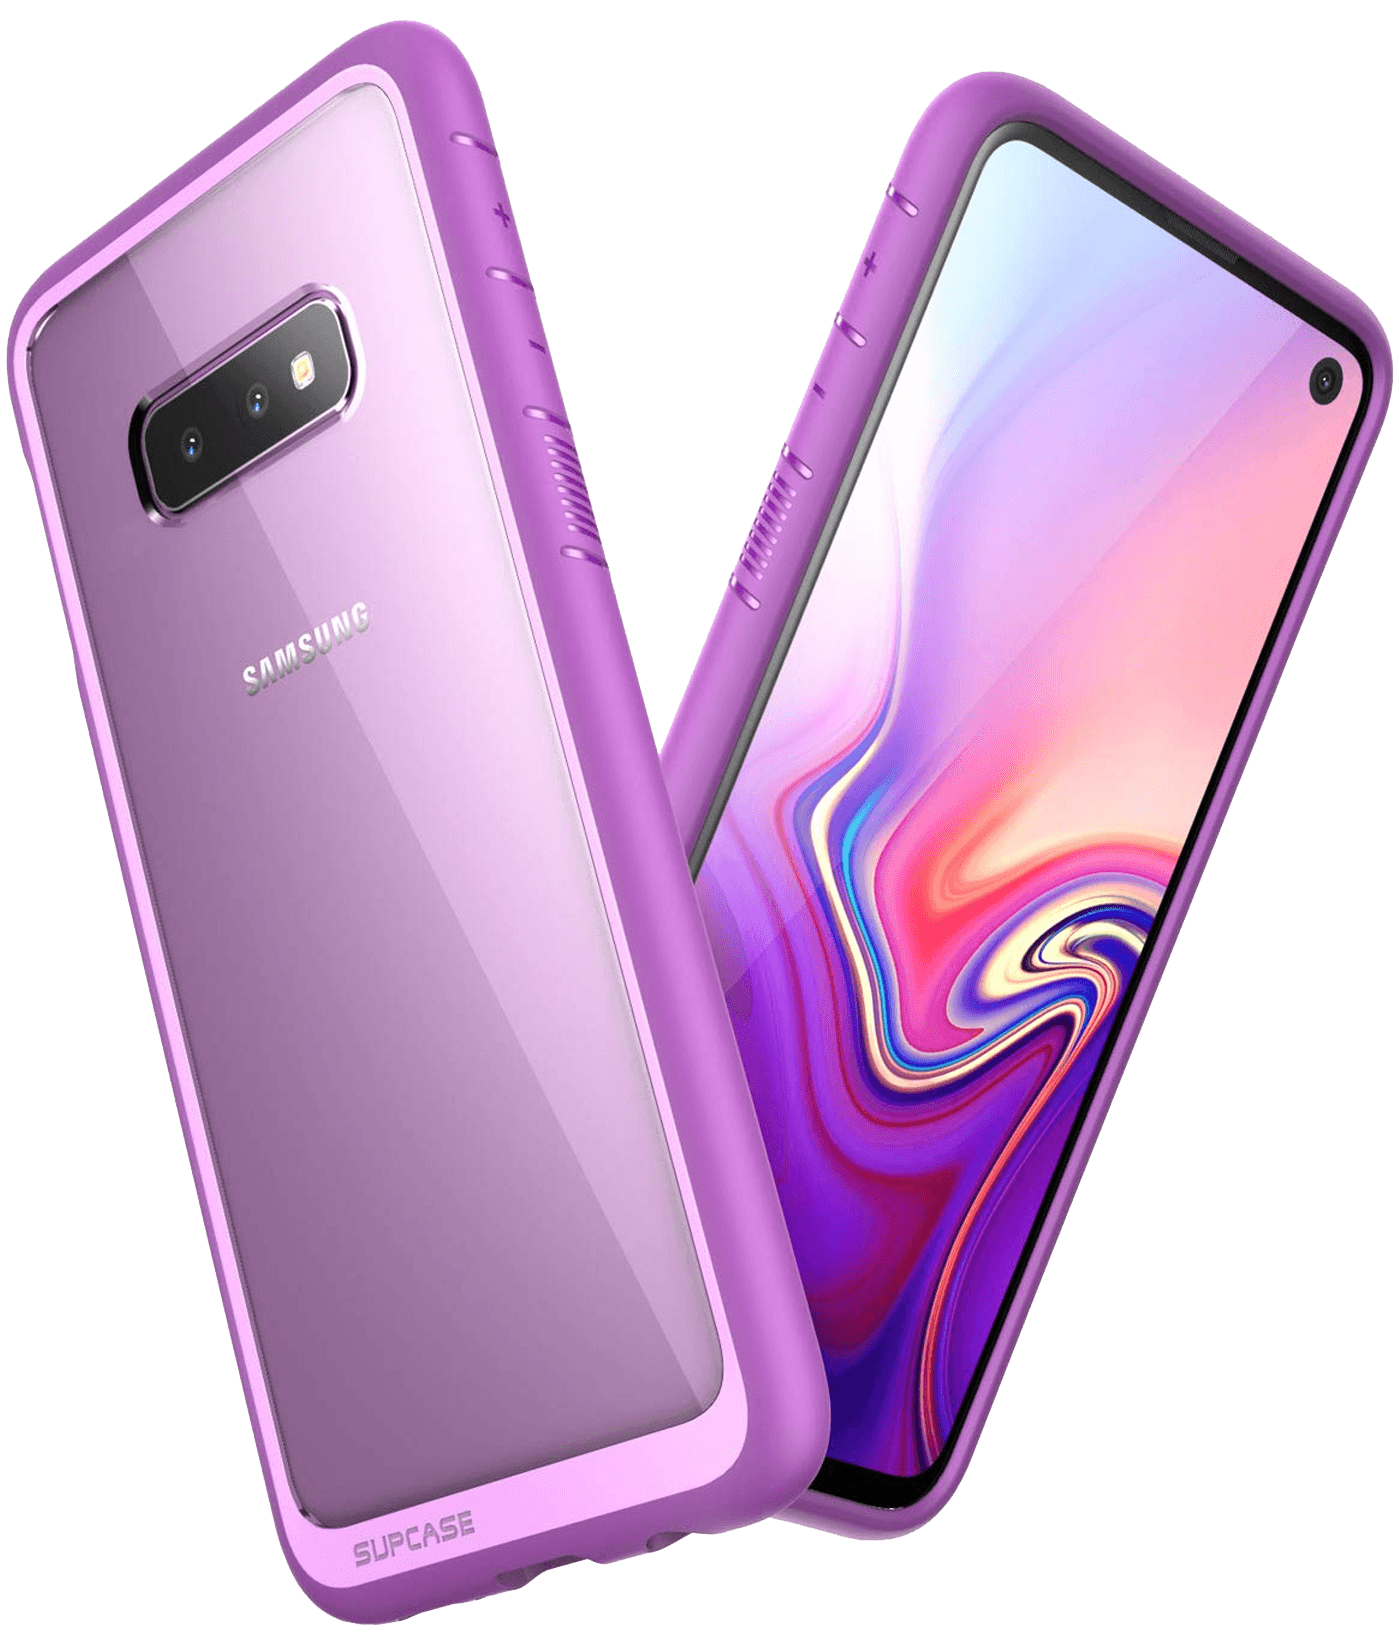 Supcase UB Style Series Hybrid Protective Clear Case for Samsung Galaxy S10e, Purple Samsung Case Supcase 